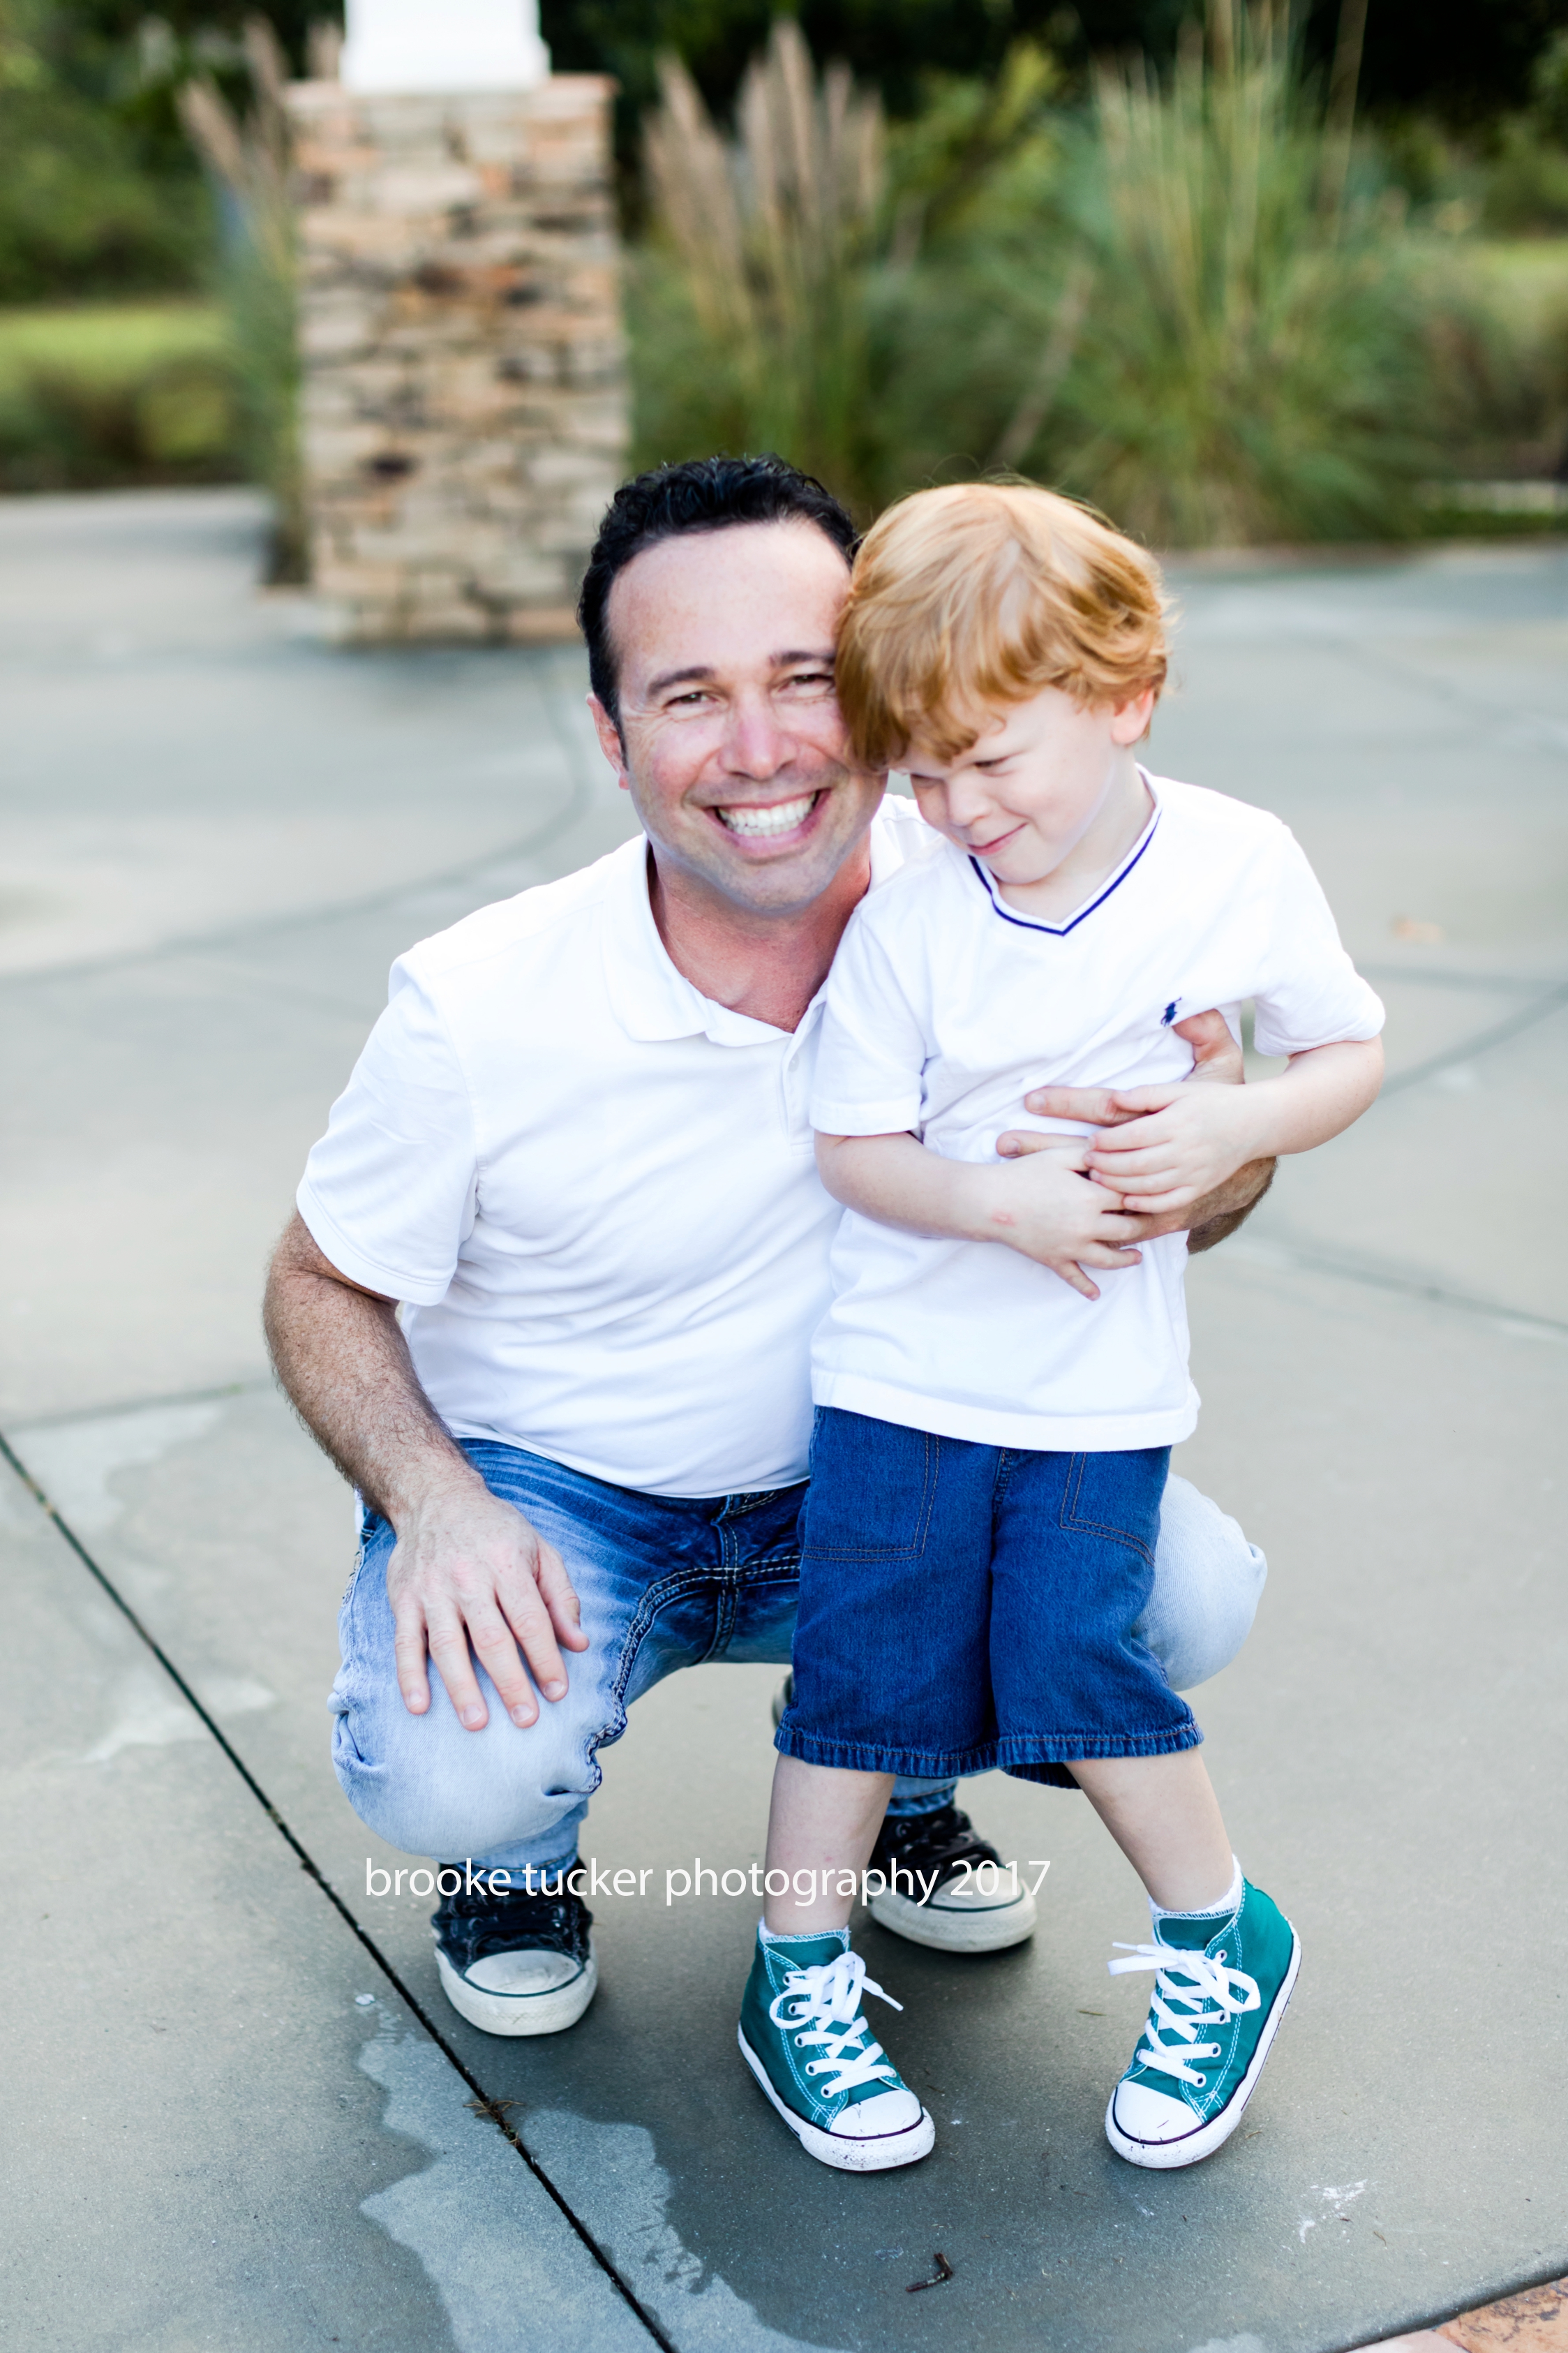 Florida Child and Family Photographer, beautiful outdoor mini session